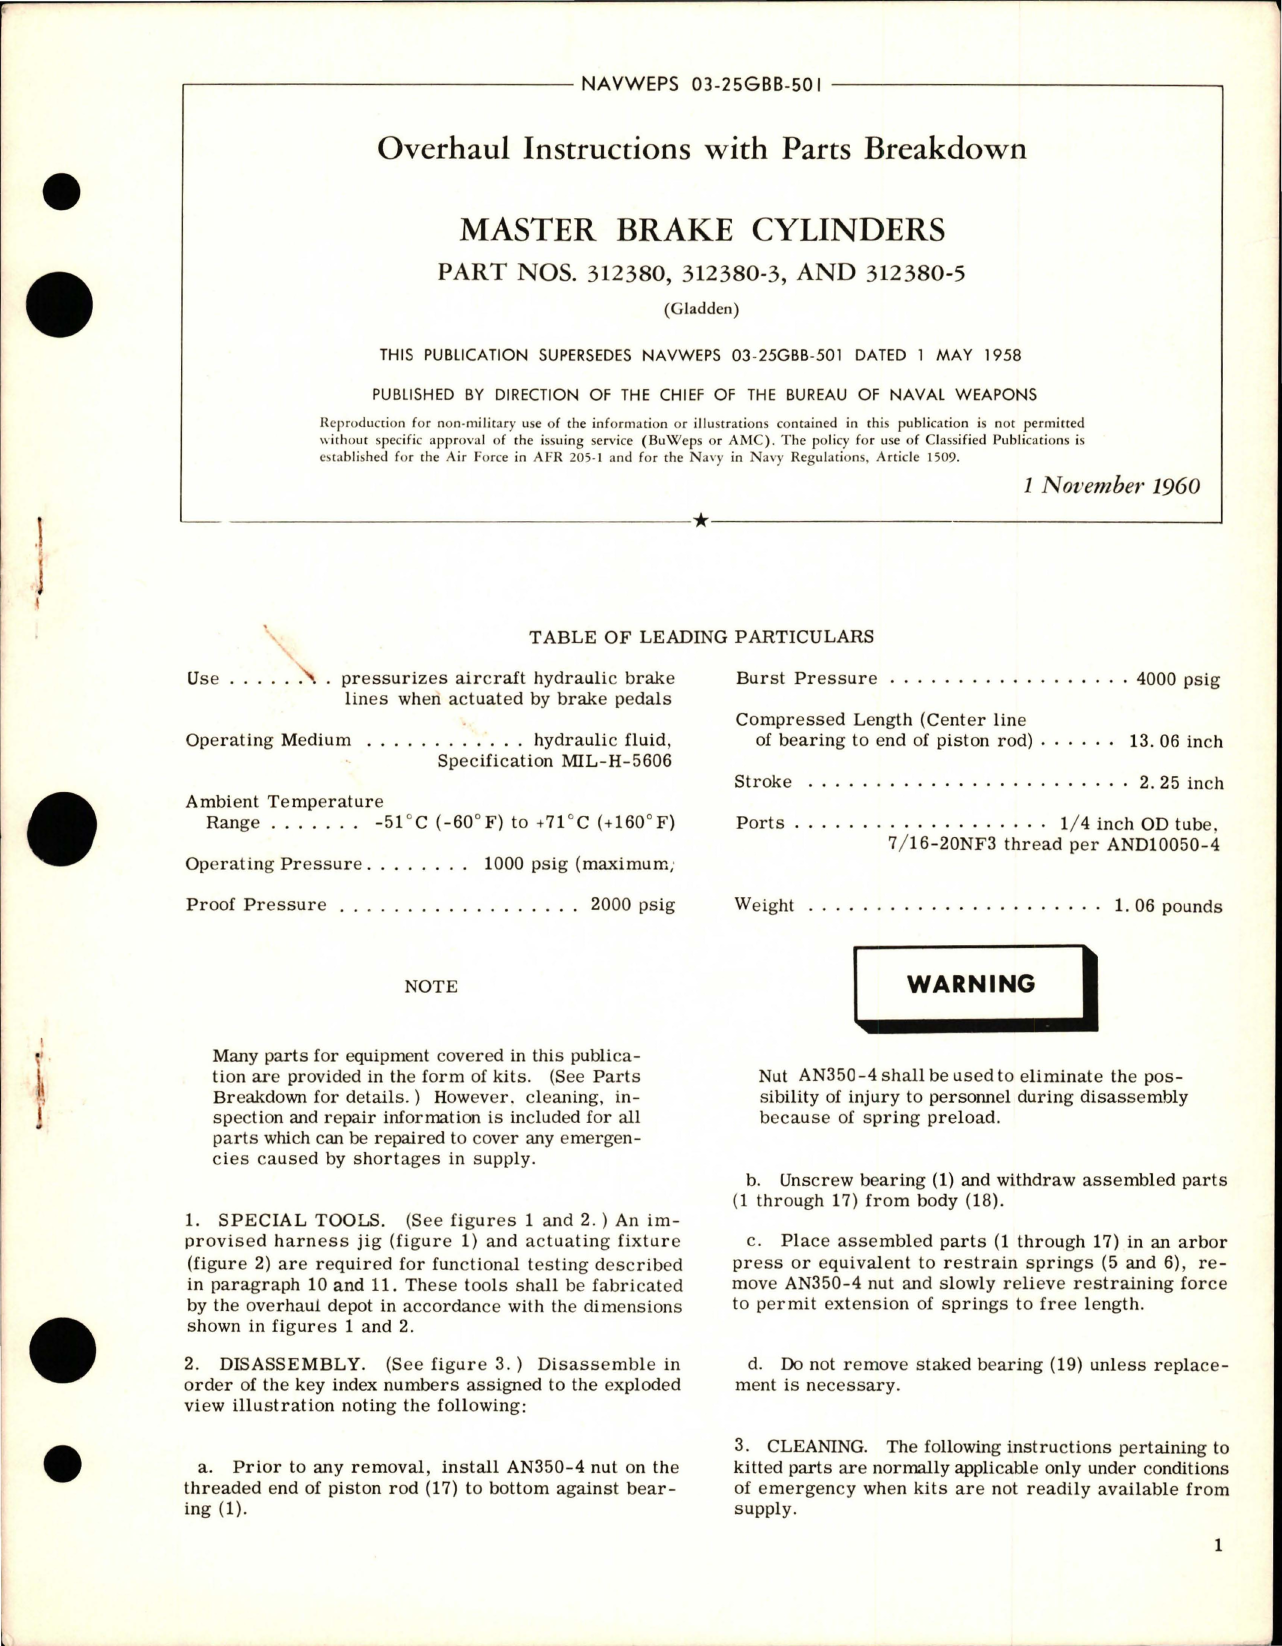 Sample page 1 from AirCorps Library document: Overhaul Instructions with Parts Breakdown for Master Brake Cylinders - Parts 312380, 312380-3, and 312380-5 